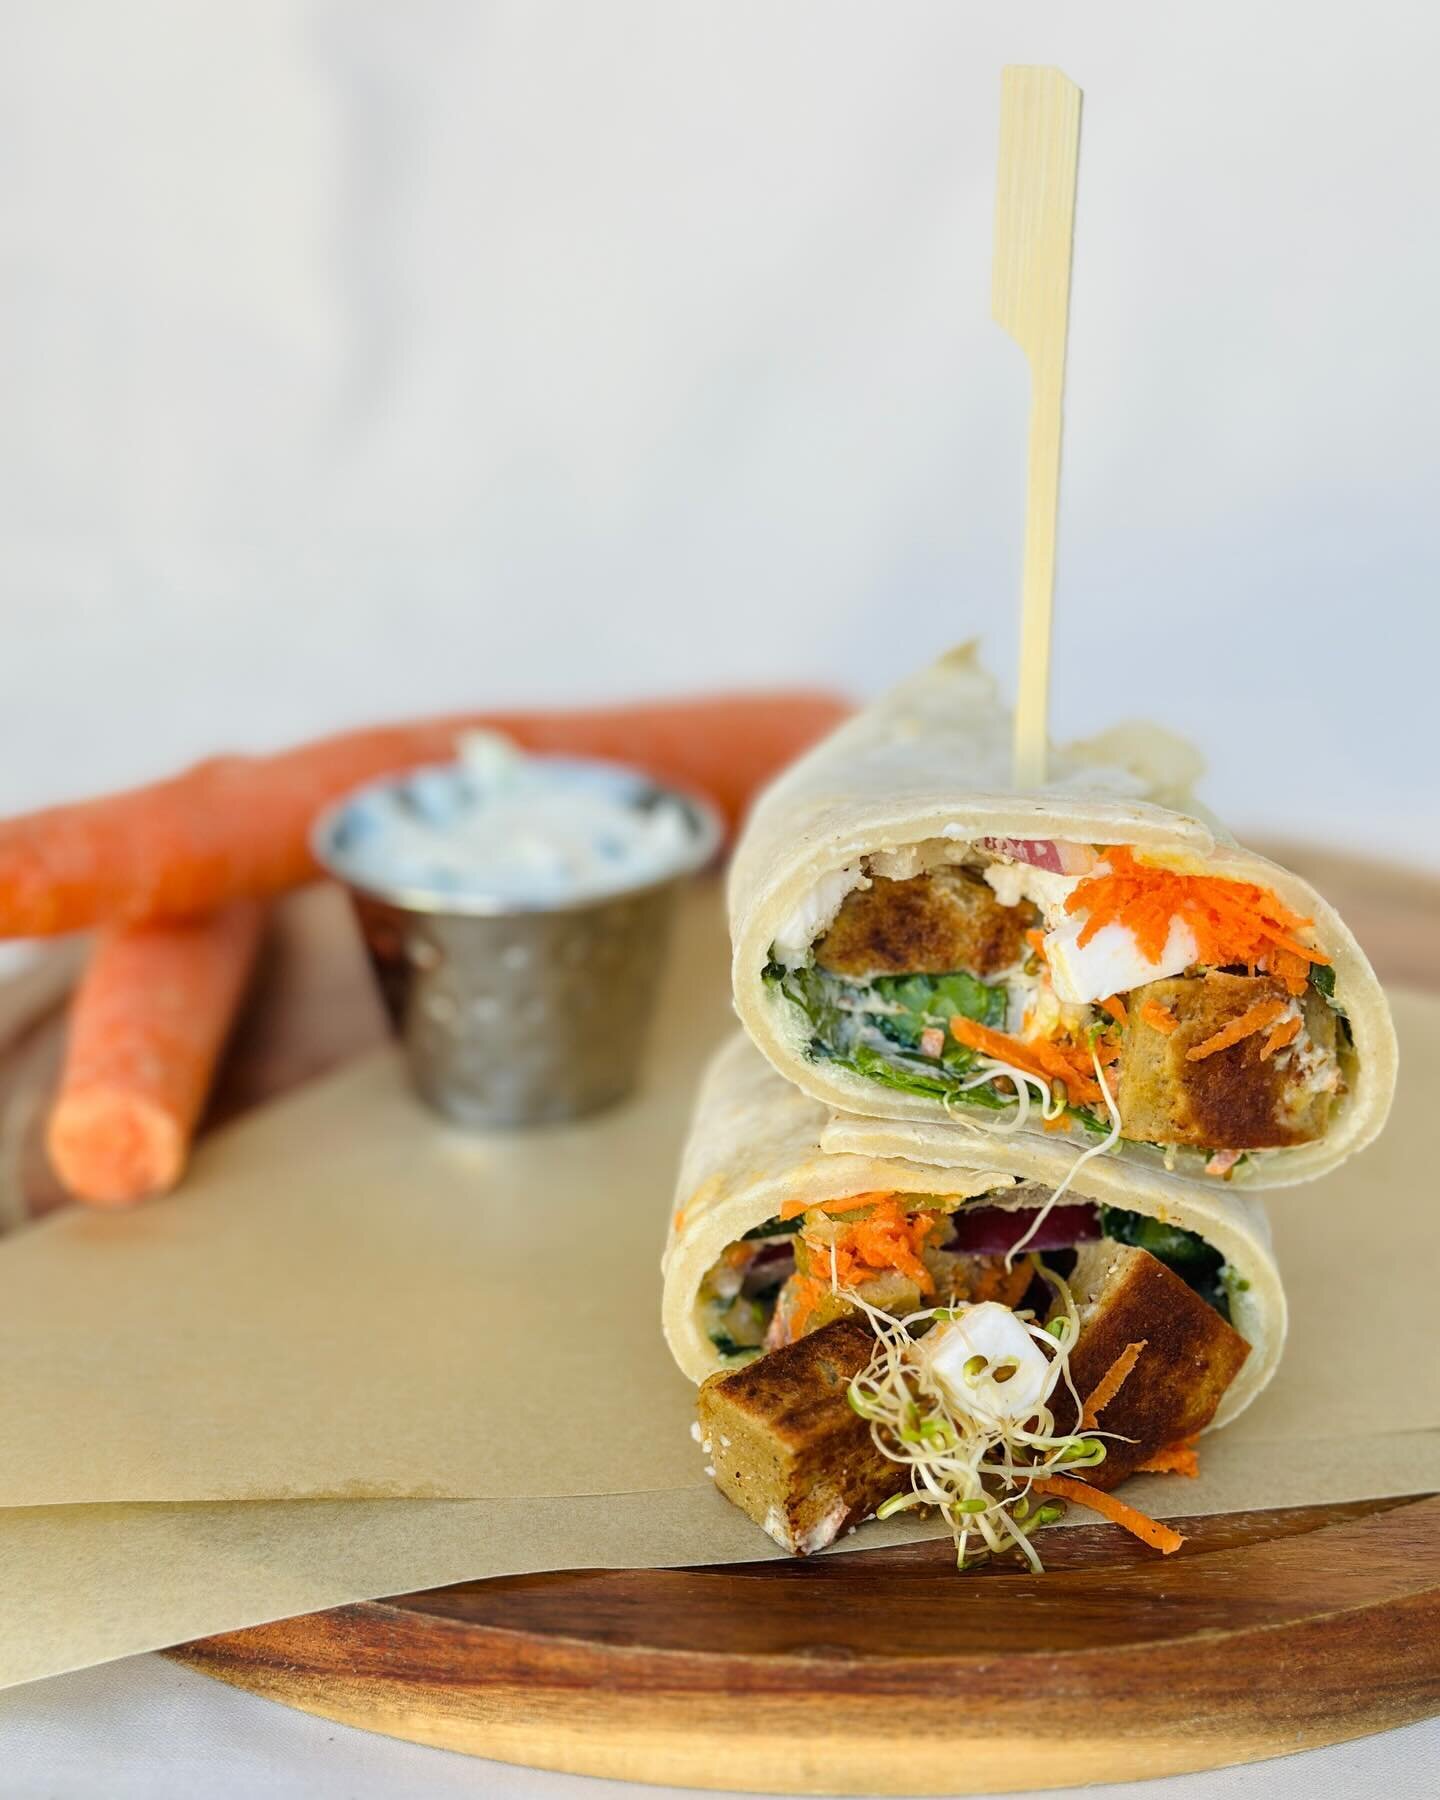 P I T A W R A P

Have you tried our new food menu?

Our pita wrap is SO GOOD - ya gotta try it. 

House made pita wrap filled with our
own grilled vegan chicken, vegan feta, carrots, sprouts, cucumber, spinach,
red onion, and tzatziki sauce. 
*contai